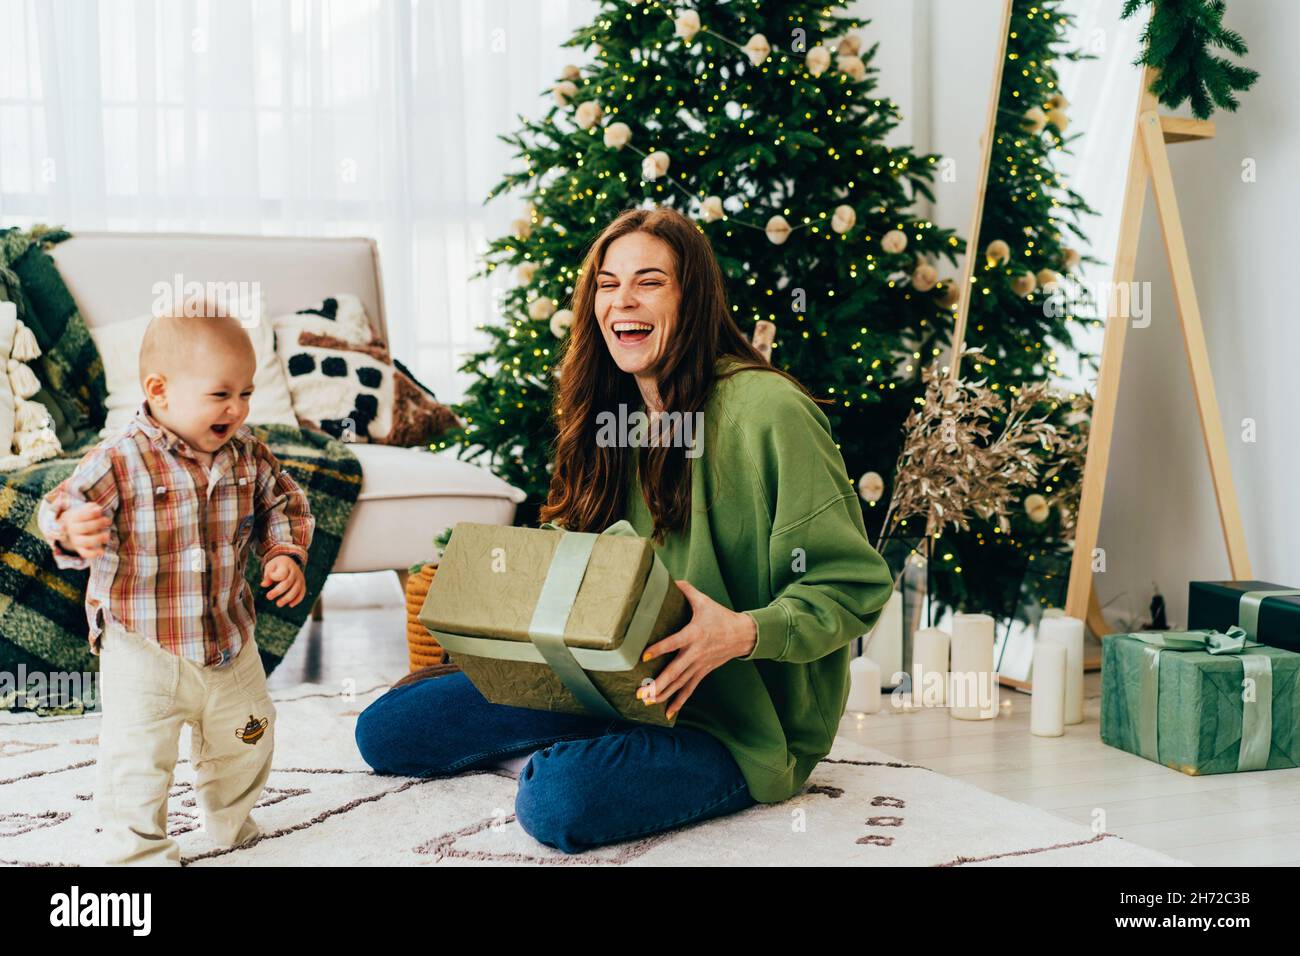 Happy cheerful laughing young mother with toddler near the Christmas tree receive Christmas gifts. Stock Photo